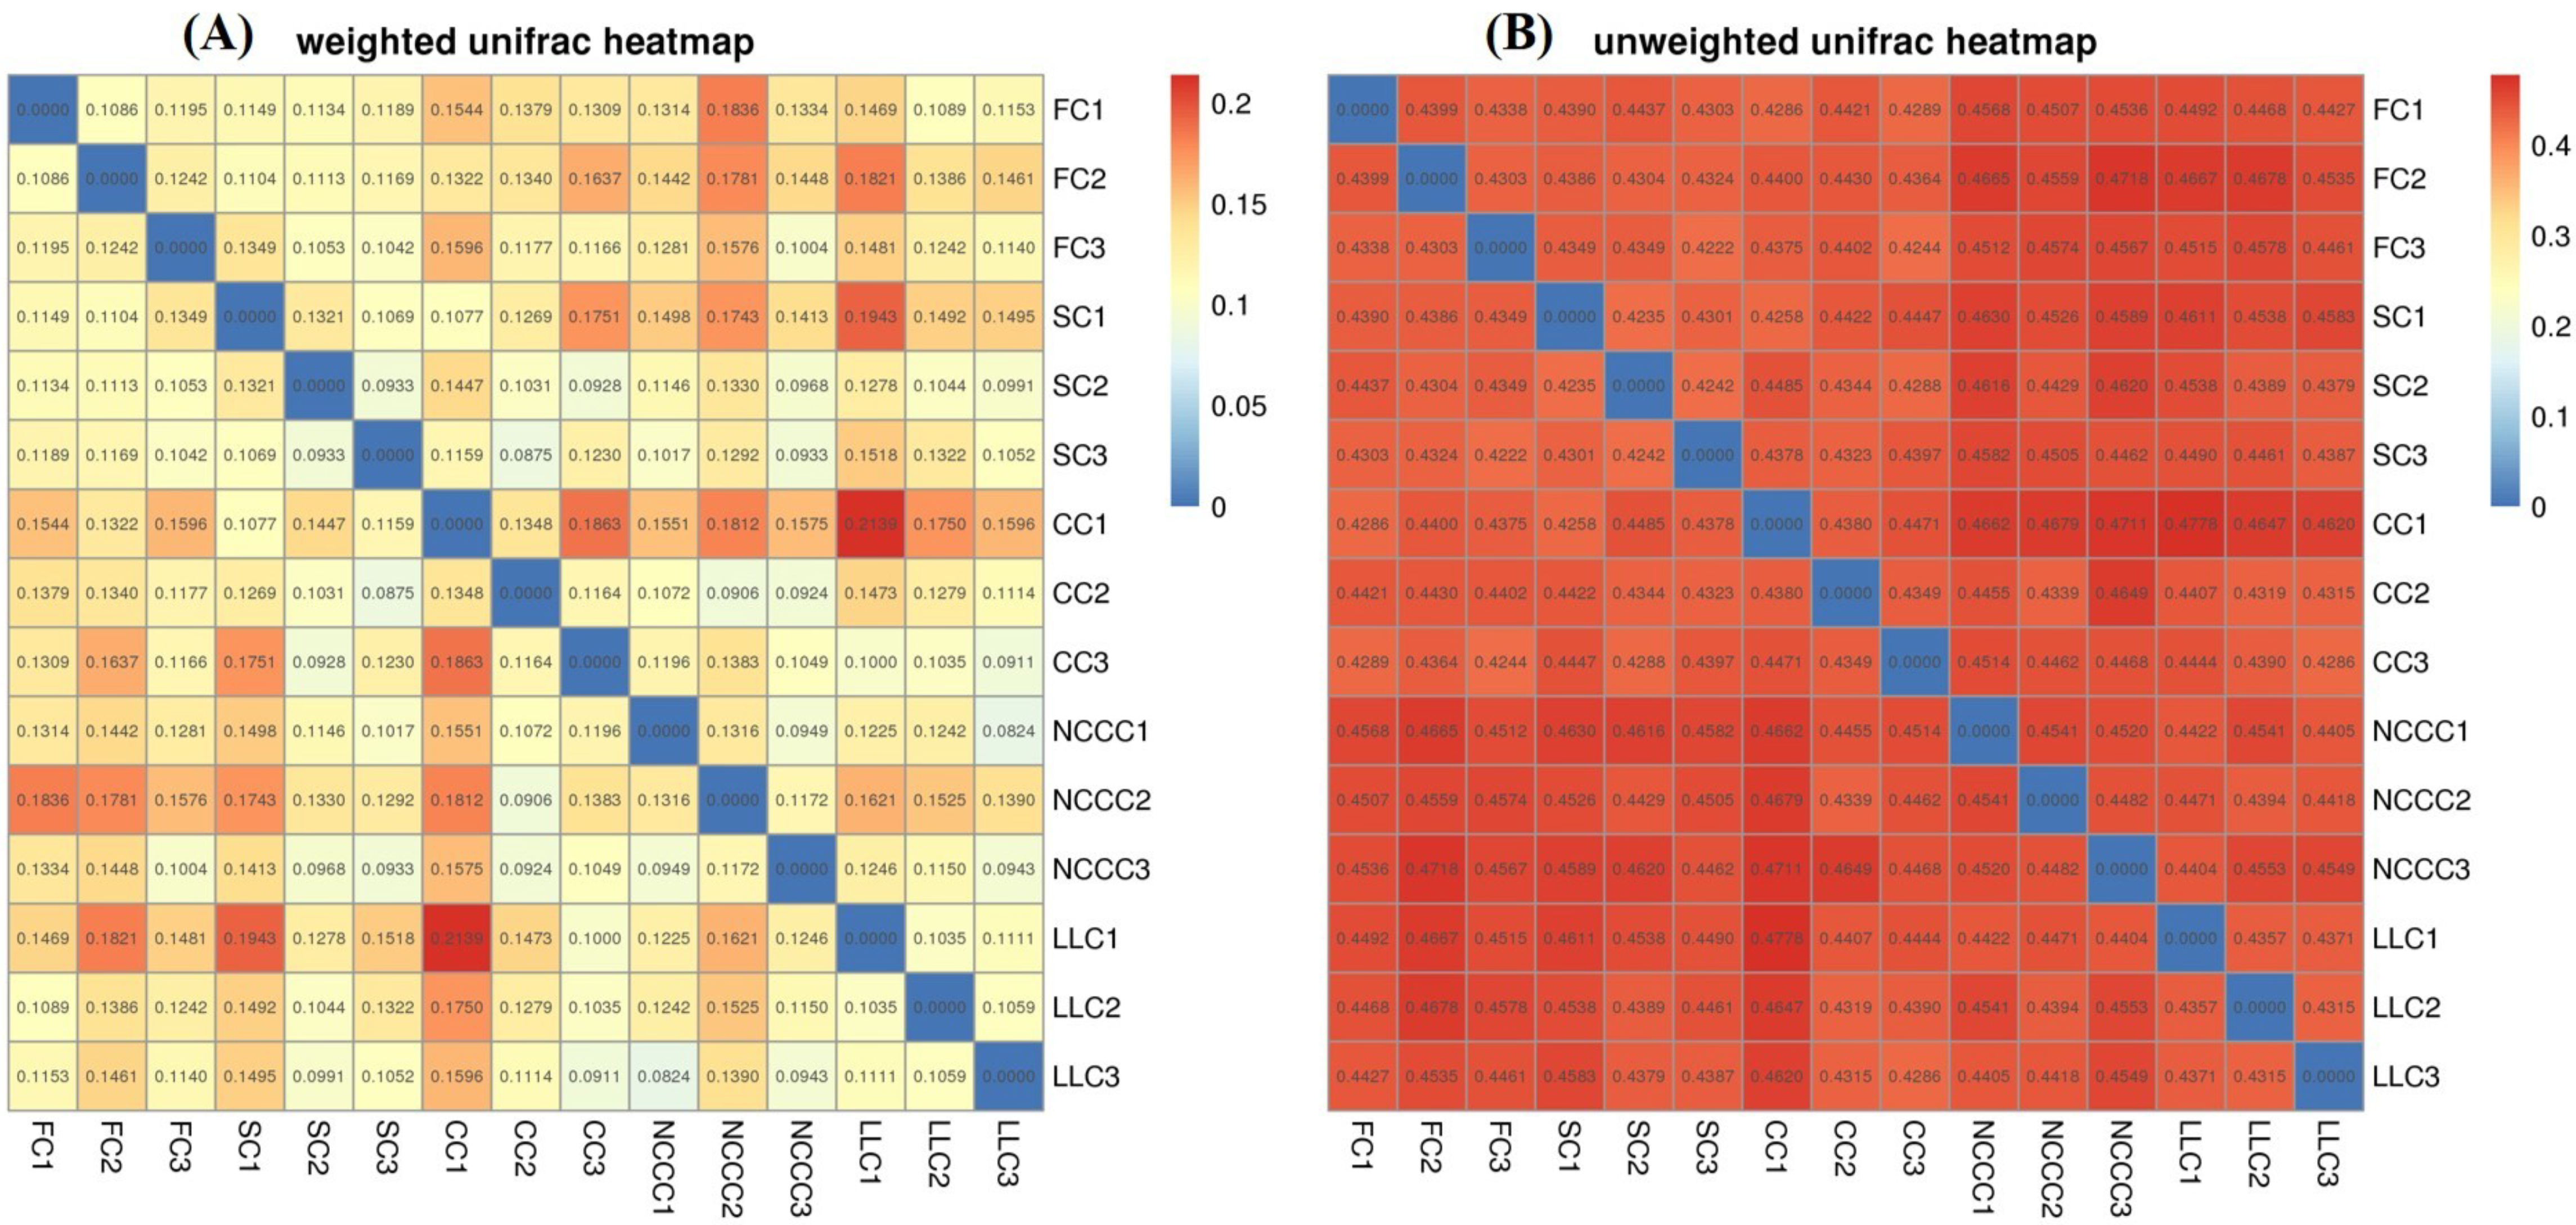 Ijms Free Full Text Hiseq Base Molecular Characterization Of Soil Microbial Community Diversity Structure And Predictive Functional Profiling In Continuous Cucumber Planted Soil Affected By Diverse Cropping Systems In An Intensive